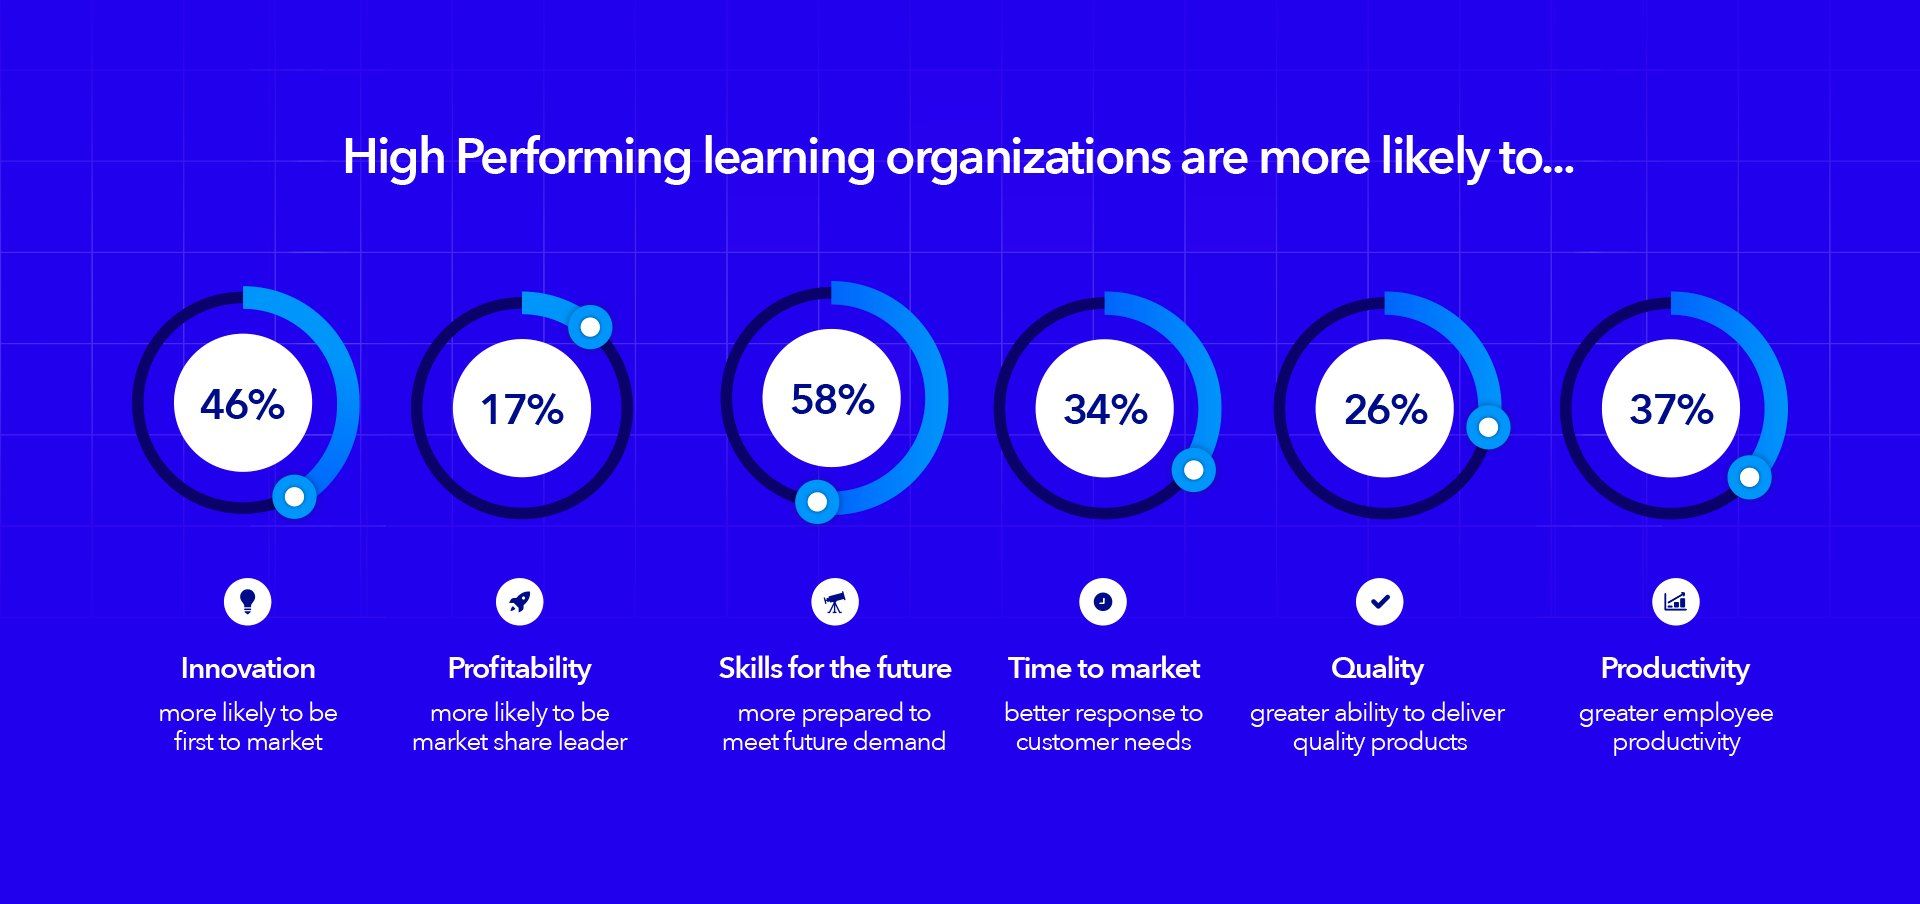 High-performing learning organizations are more likely to be: 46% first to market; 17% market share leader; 58% more prepared to meet future demand; 34% respond better to customer needs; 26% deliver greater quality products; and, 37% greater employee productivity.